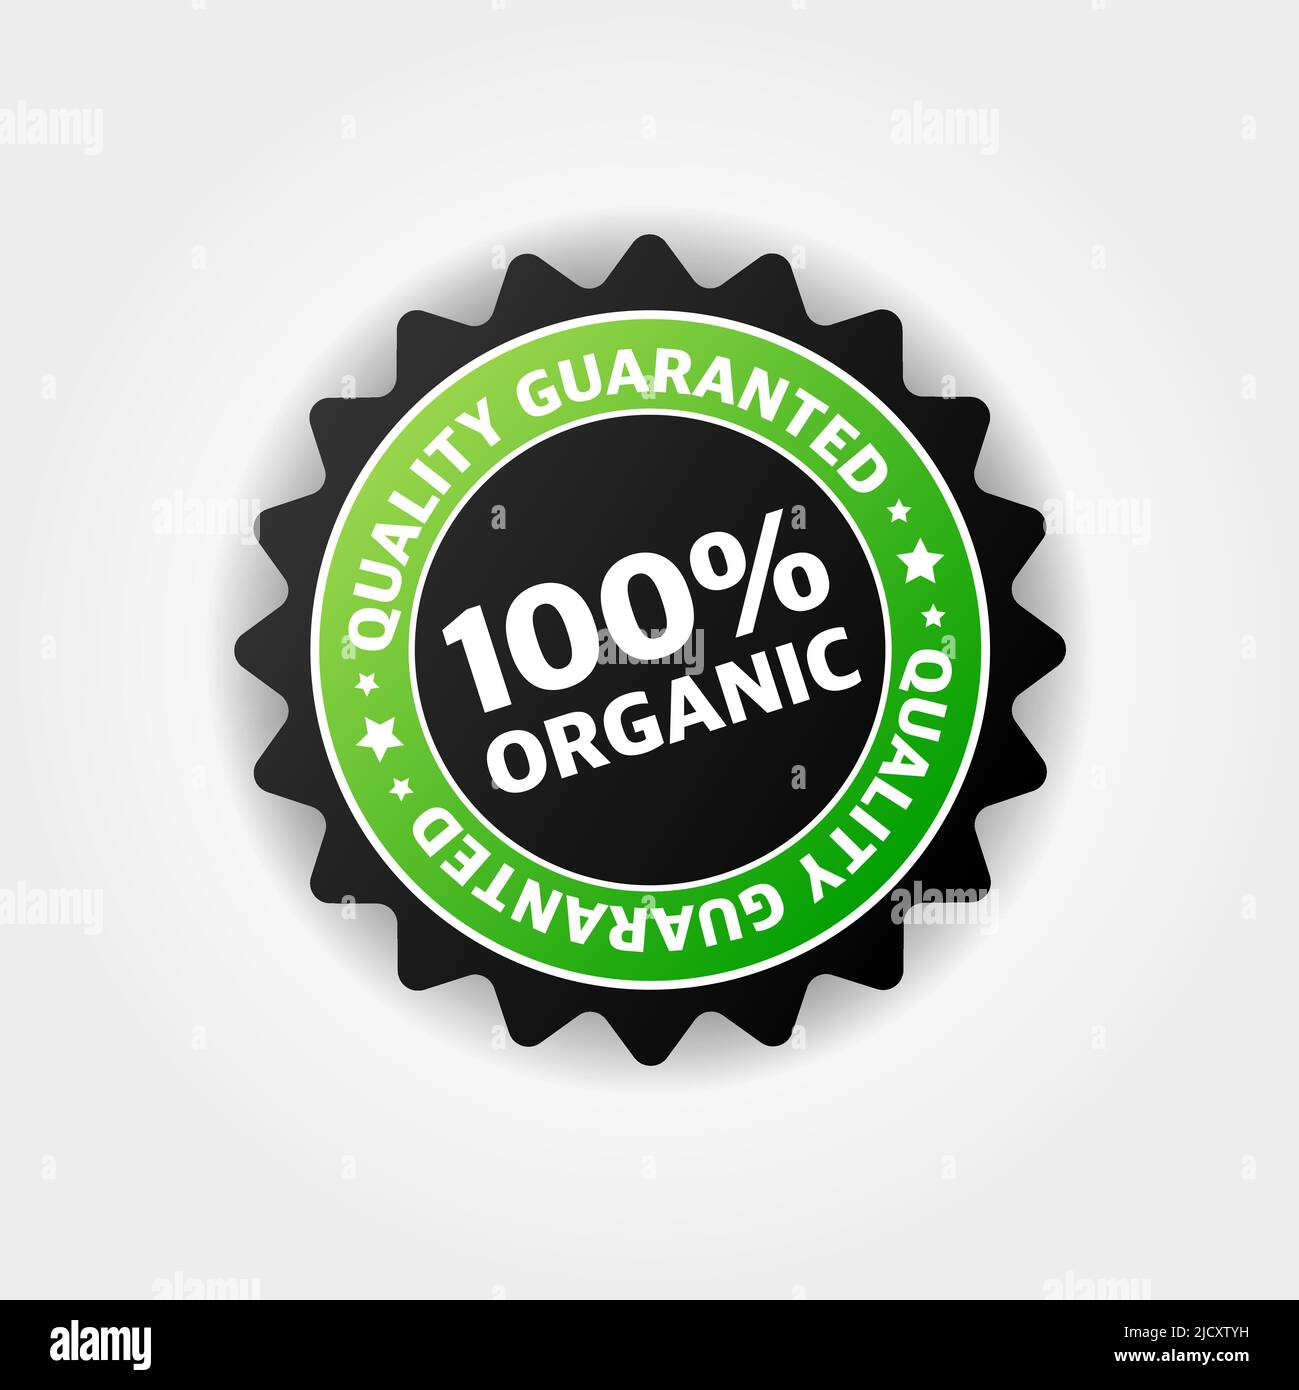 Grunge office label with the text 100% organic. Natural health food. Stock Vector